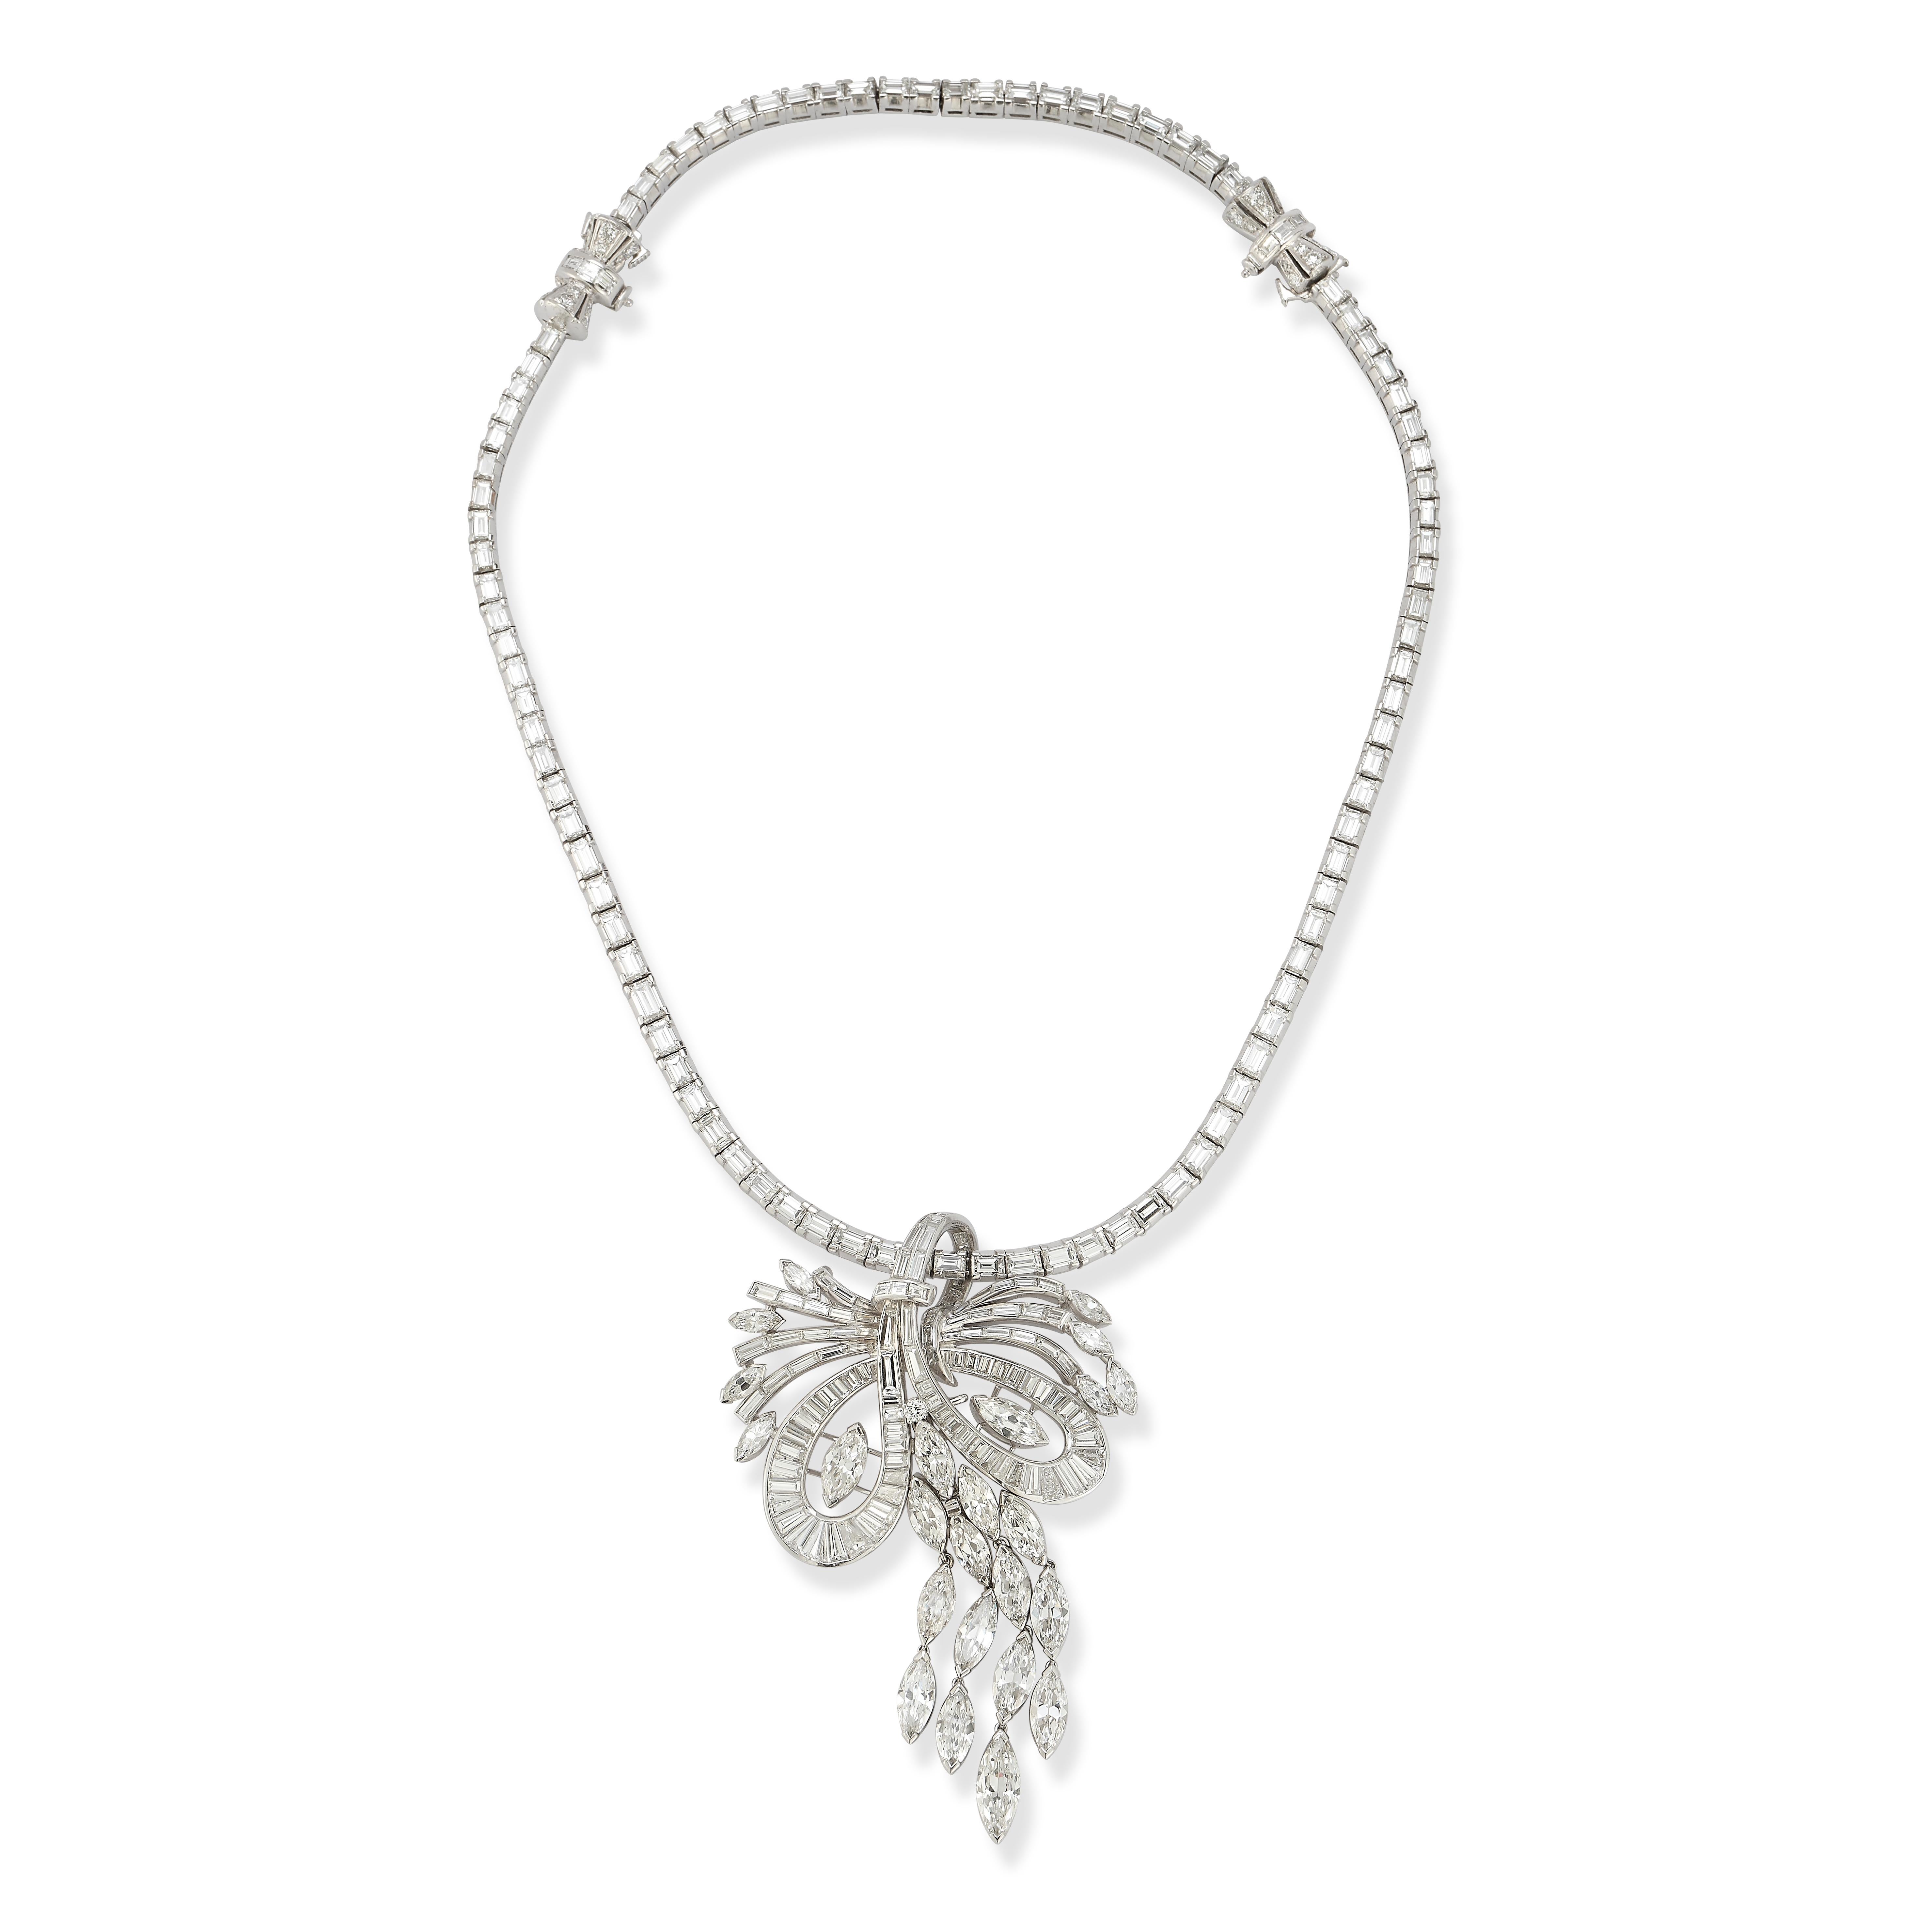 Diamond Pendant Necklace

A tennis necklace featuring baguette & round cut diamonds & two diamond bow motif clasps. The pendant set with baguette & marquise diamonds is removable as a brooch. 

Necklace Carat Weight: approximately 13.95